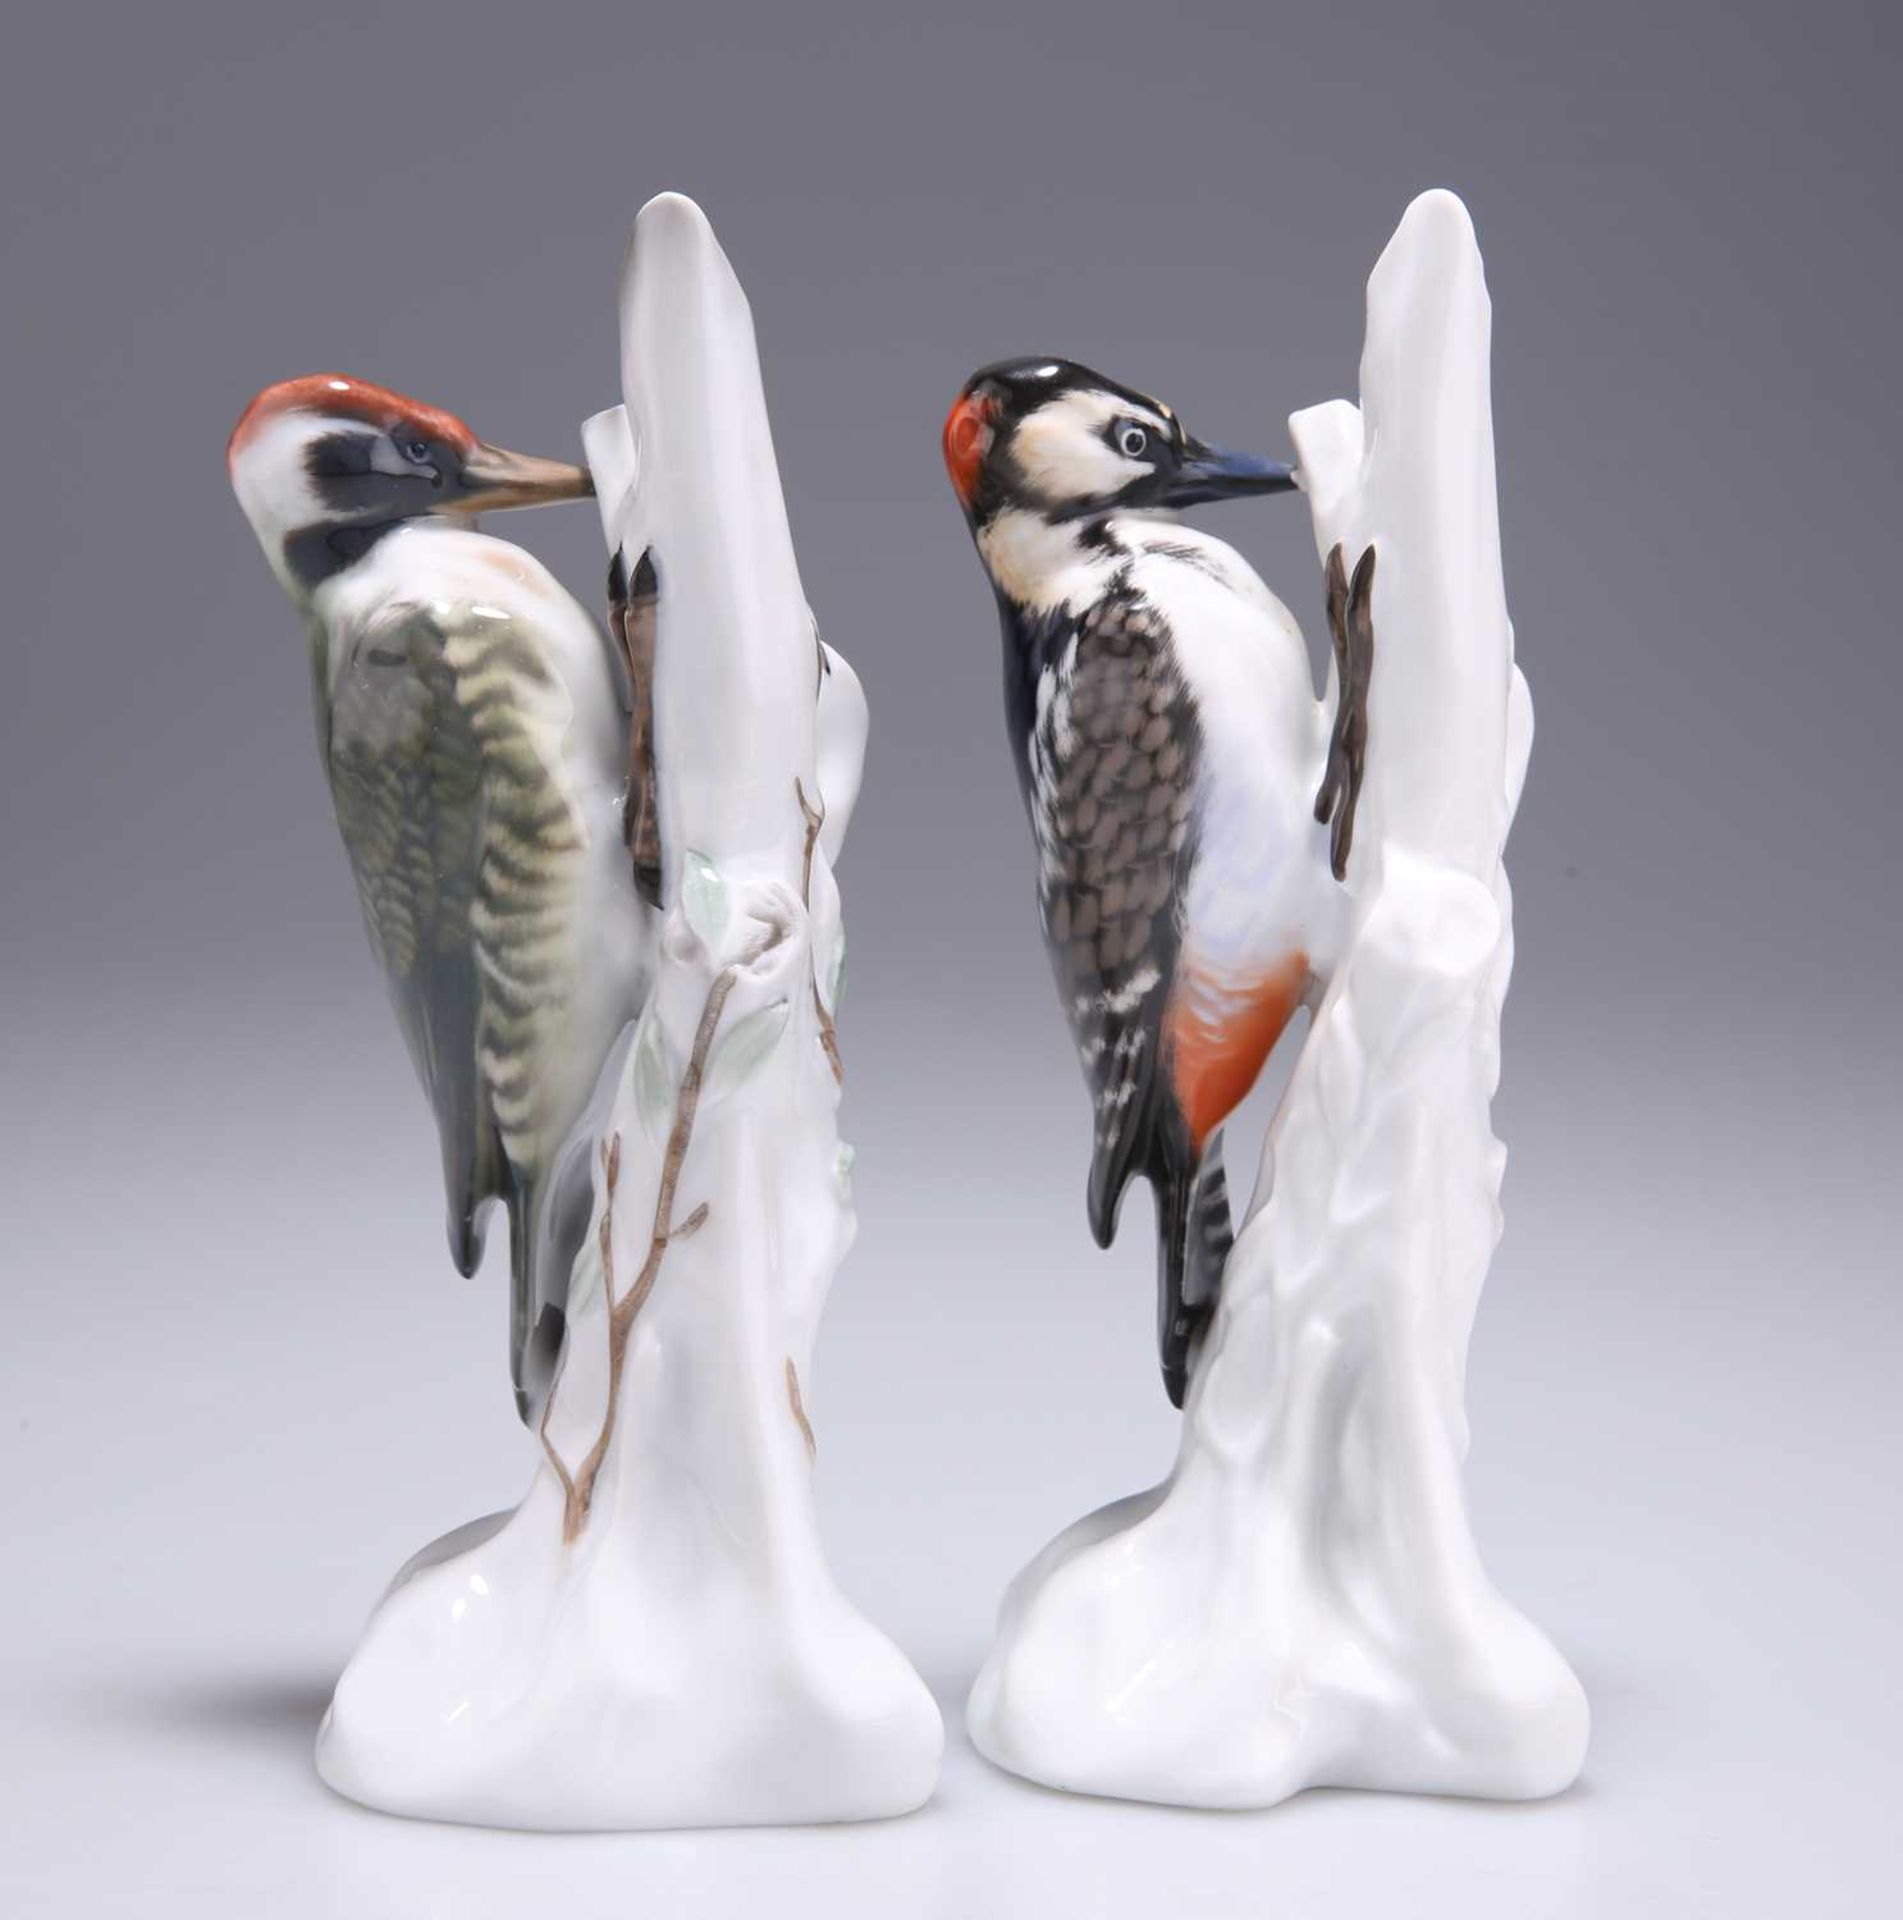 TWO ROSENTHAL PORCELAIN MODELS OF WOODPECKERS